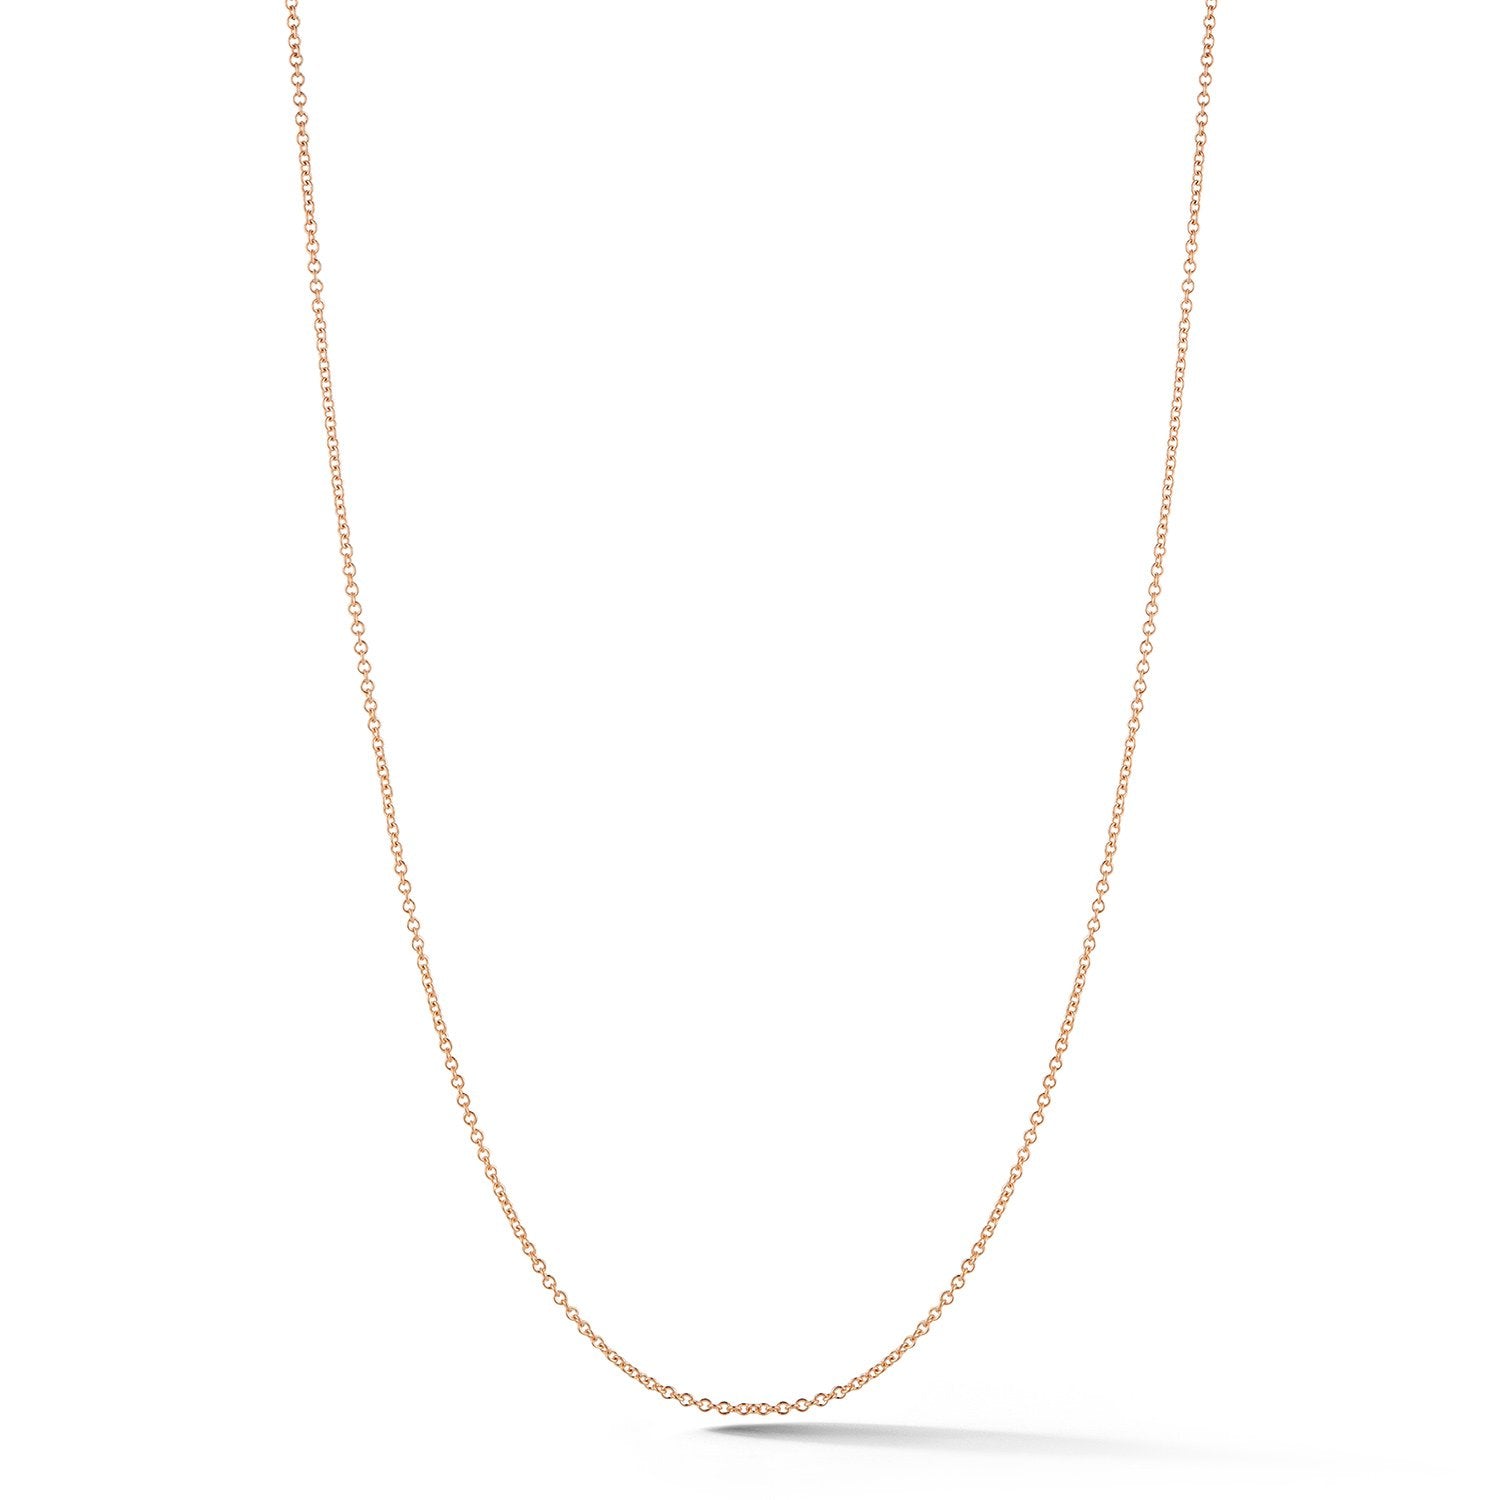 Cable Link Chain Necklace in 18K Rose Gold